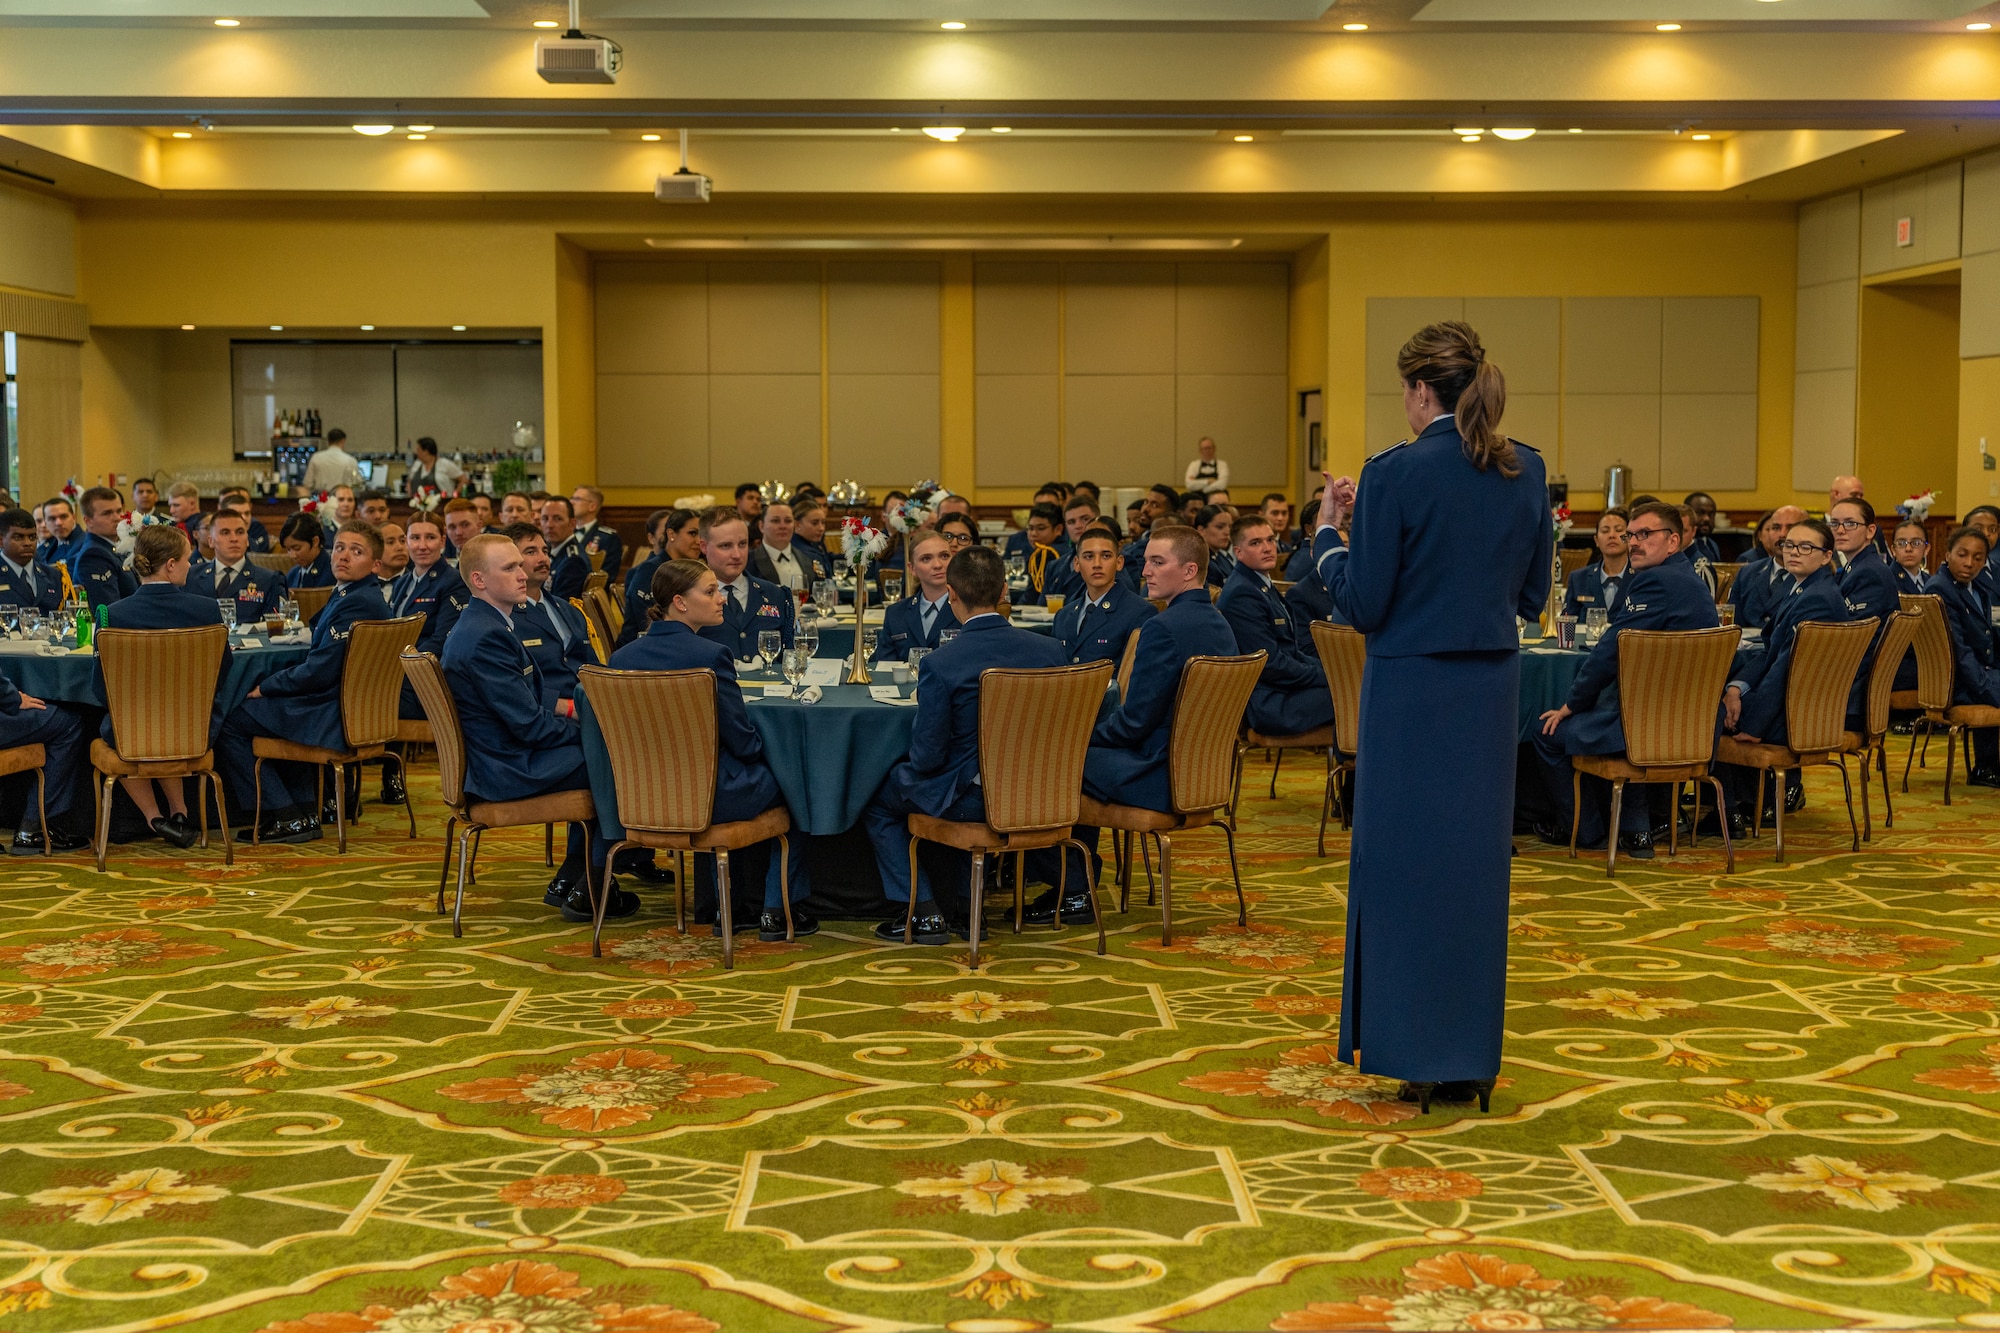 U.S. Air Force Col. Laura King, 81st Training Group commander, gives her opening remarks during the Airman’s Ball at Keesler Air Force Base, Mississippi, Sept. 14, 2023.